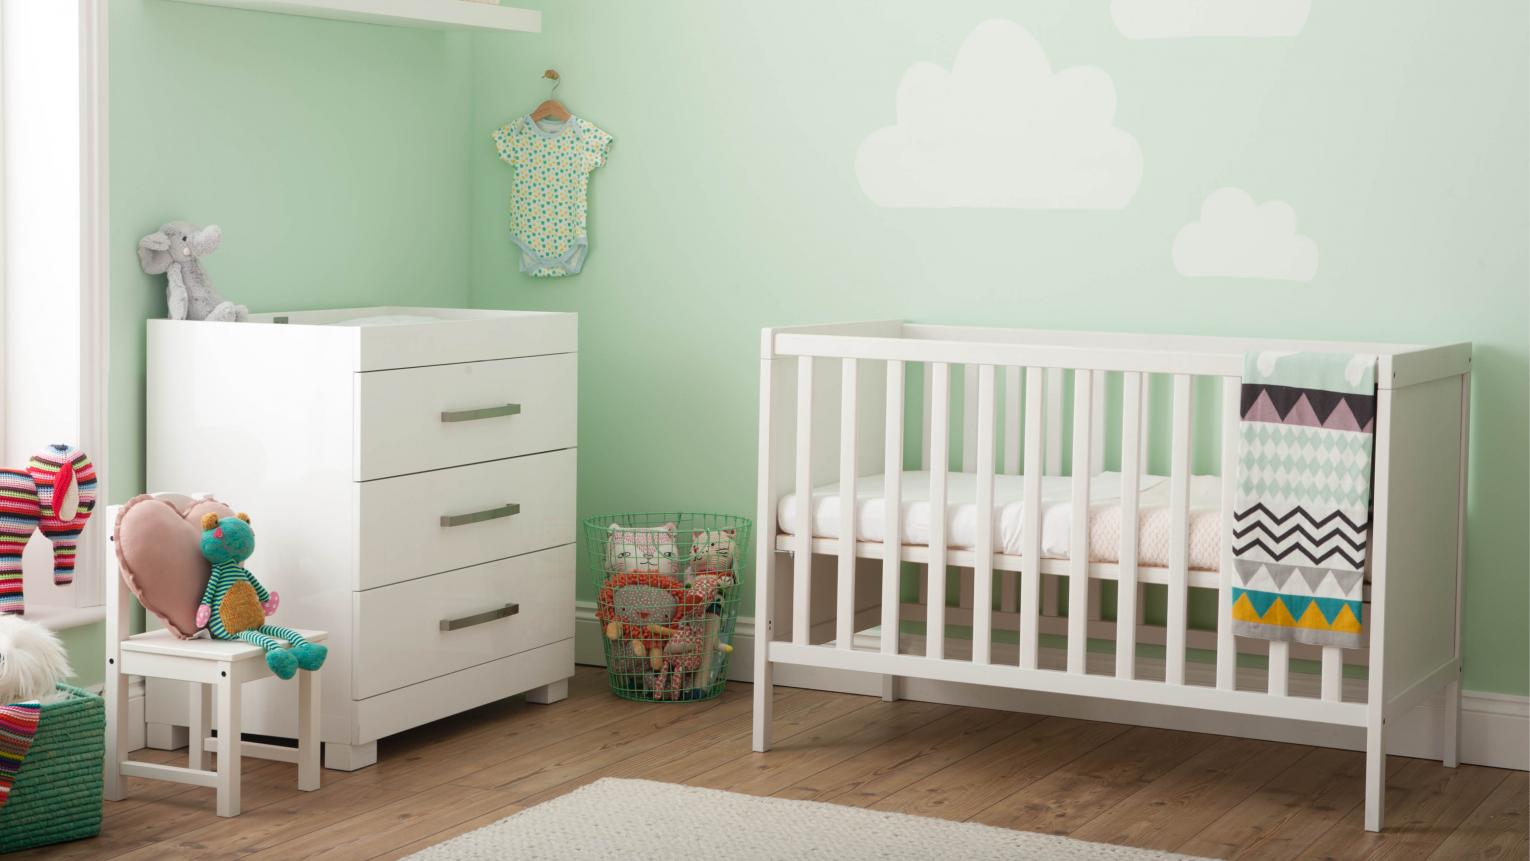 Baby nursery color schemes for your baby room